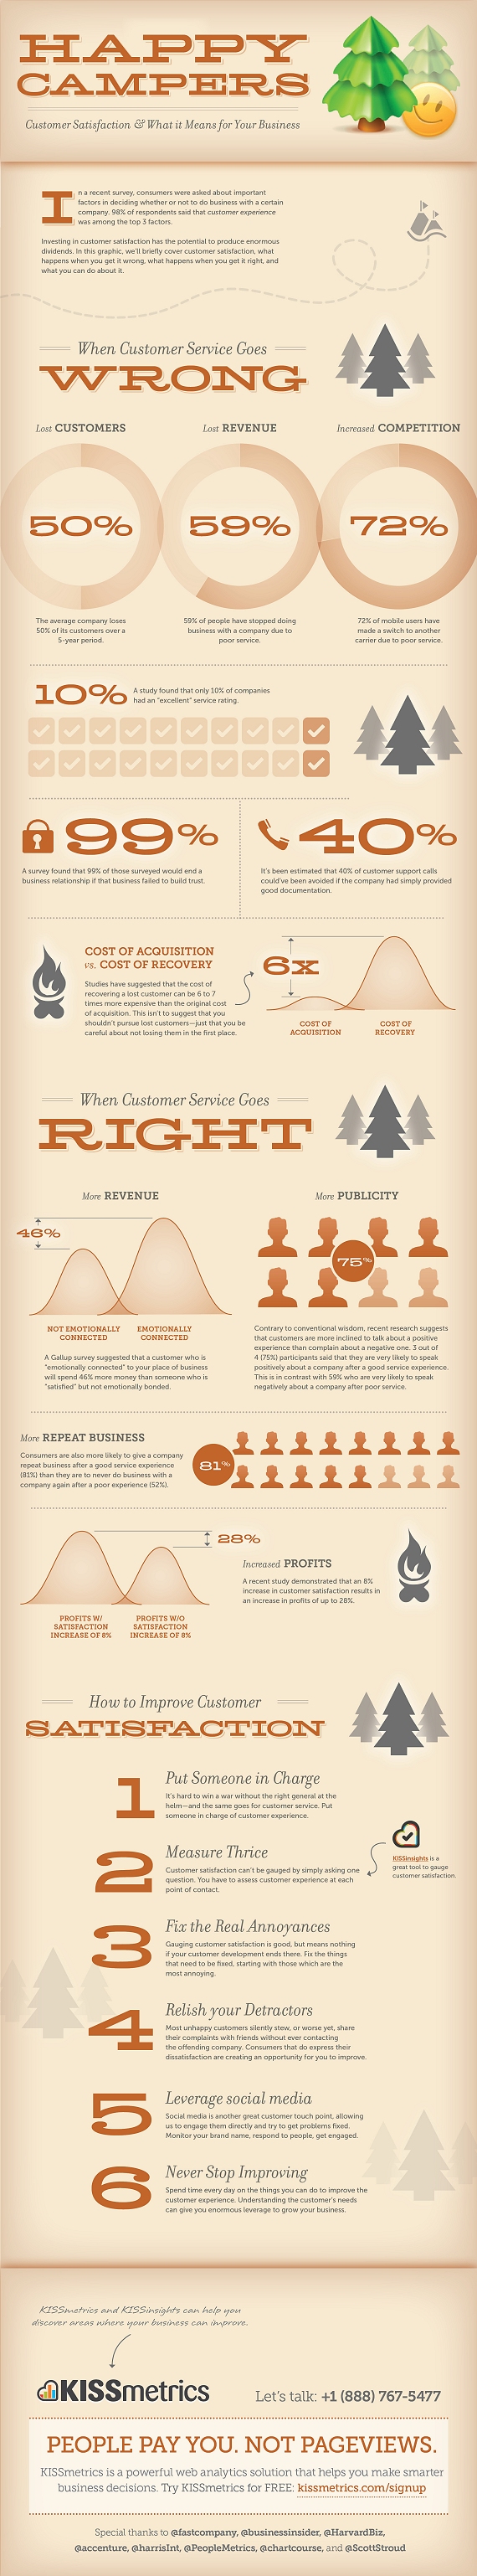 Happy Campers - Customer Satisfaction & What it Means for Your Business